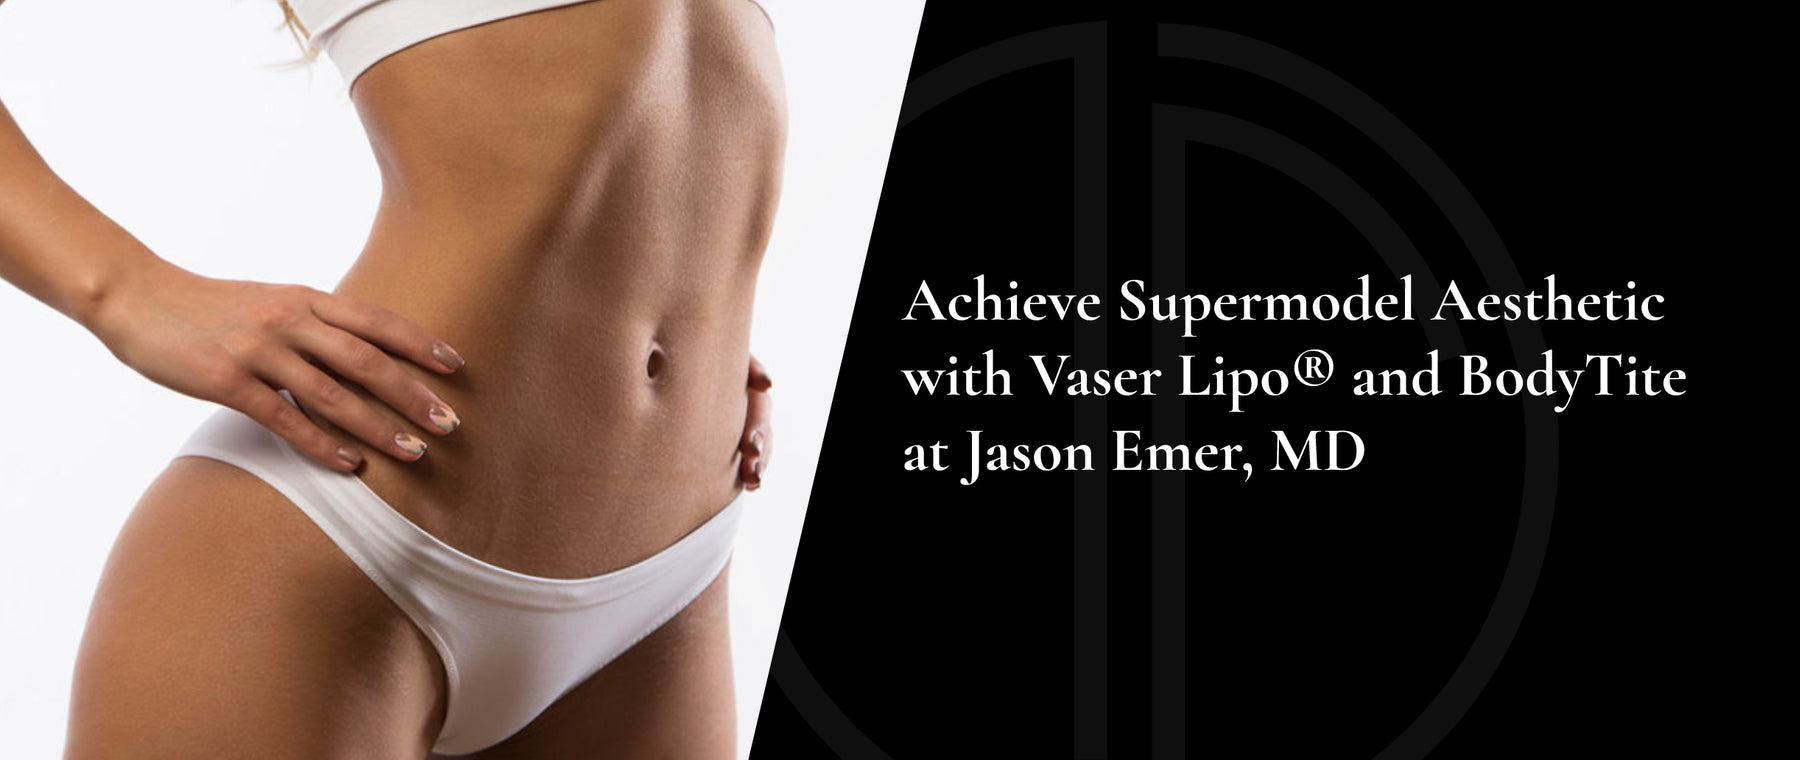 Achieve Supermodel Aesthetic with Vaser Lipo® and BodyTite at Jason Emer, MD